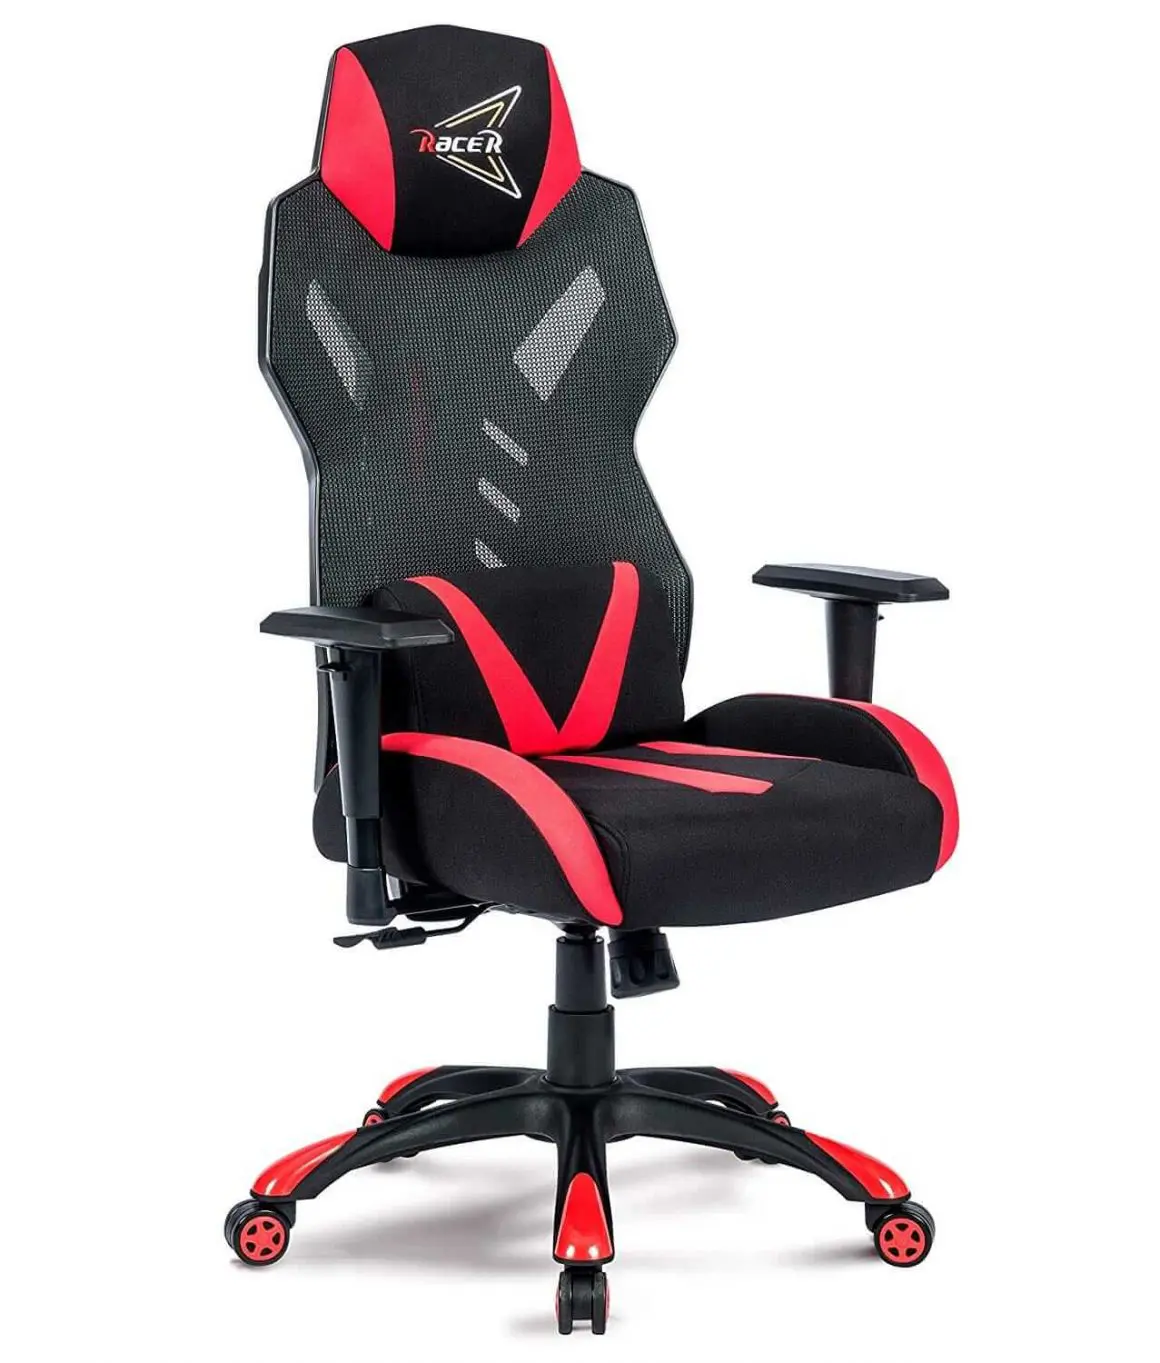 Adjustable Swivel Gaming Chair with LED Lights and Remote-Red - Color: Red